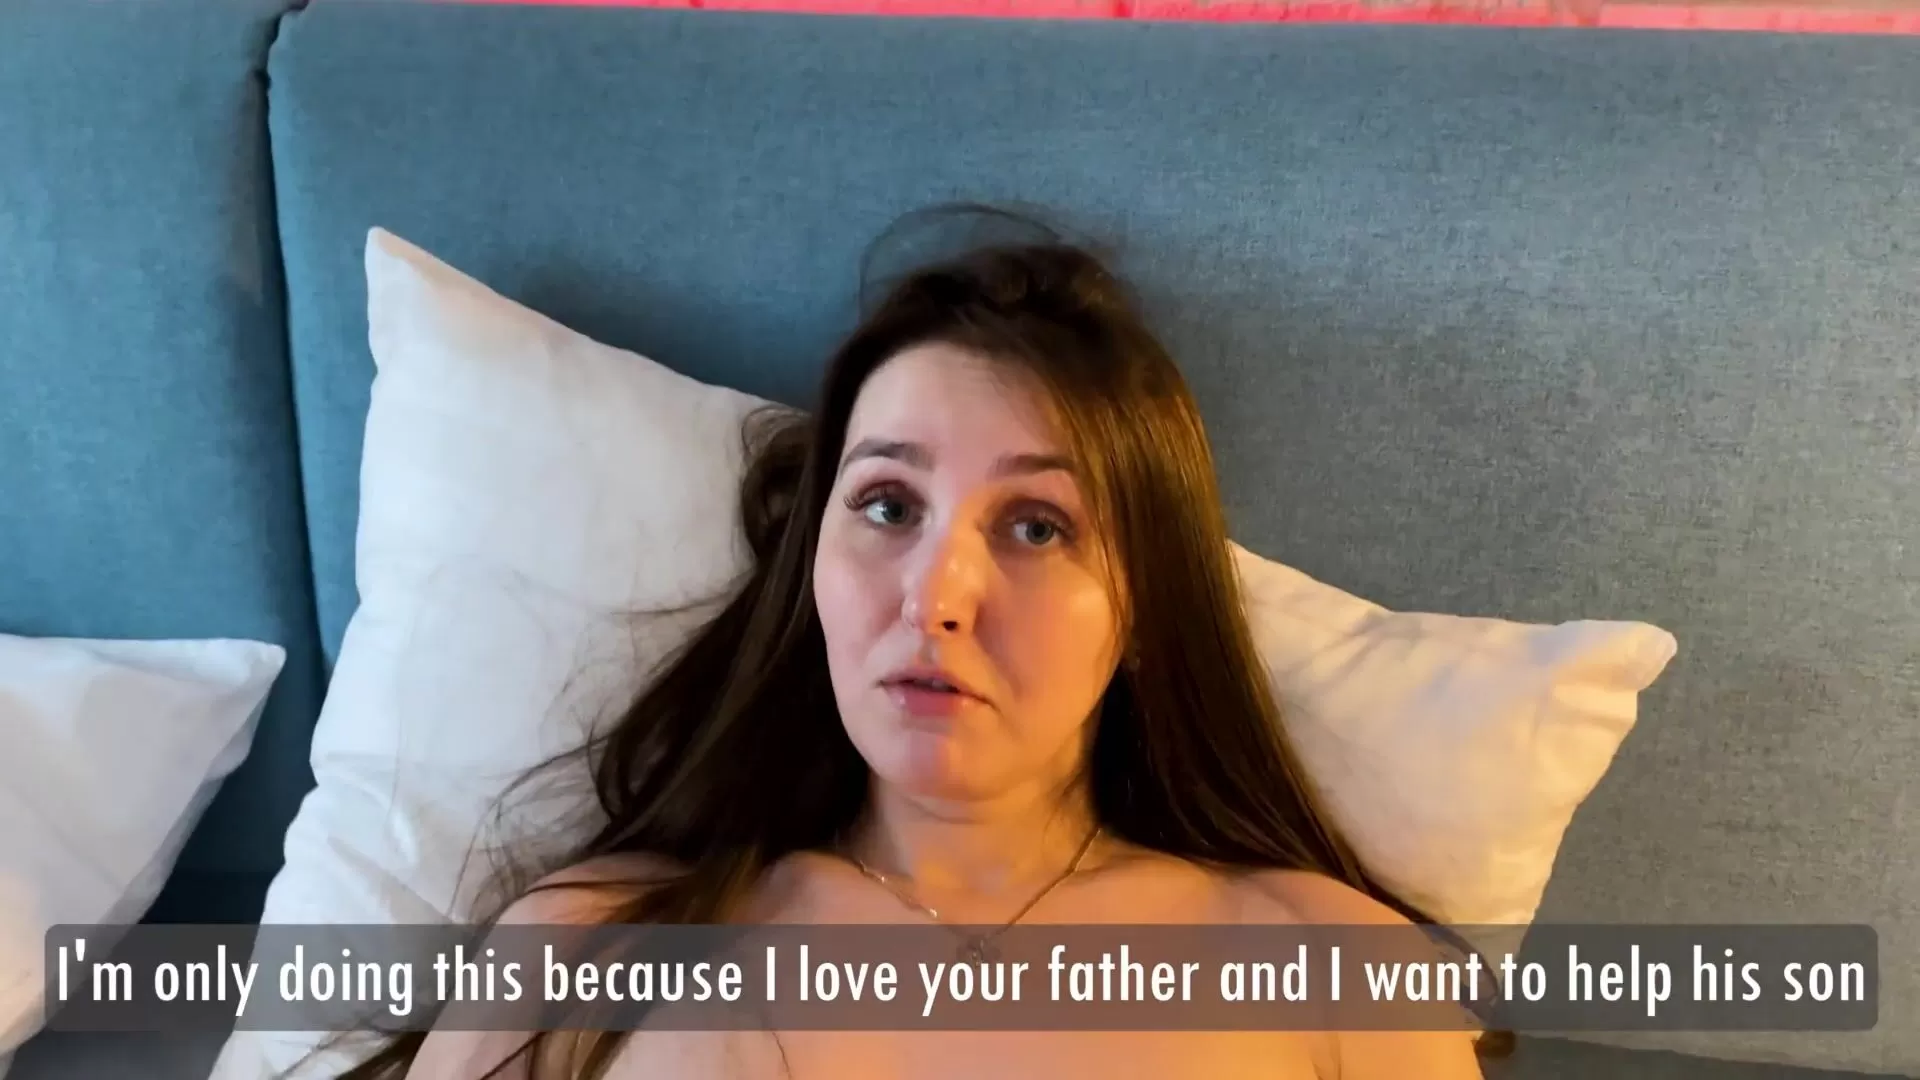 Mum Leg Open Sex For Me - Stepson, I will spread my legs for you for the last time. - Thank you,  StepMom! watch online